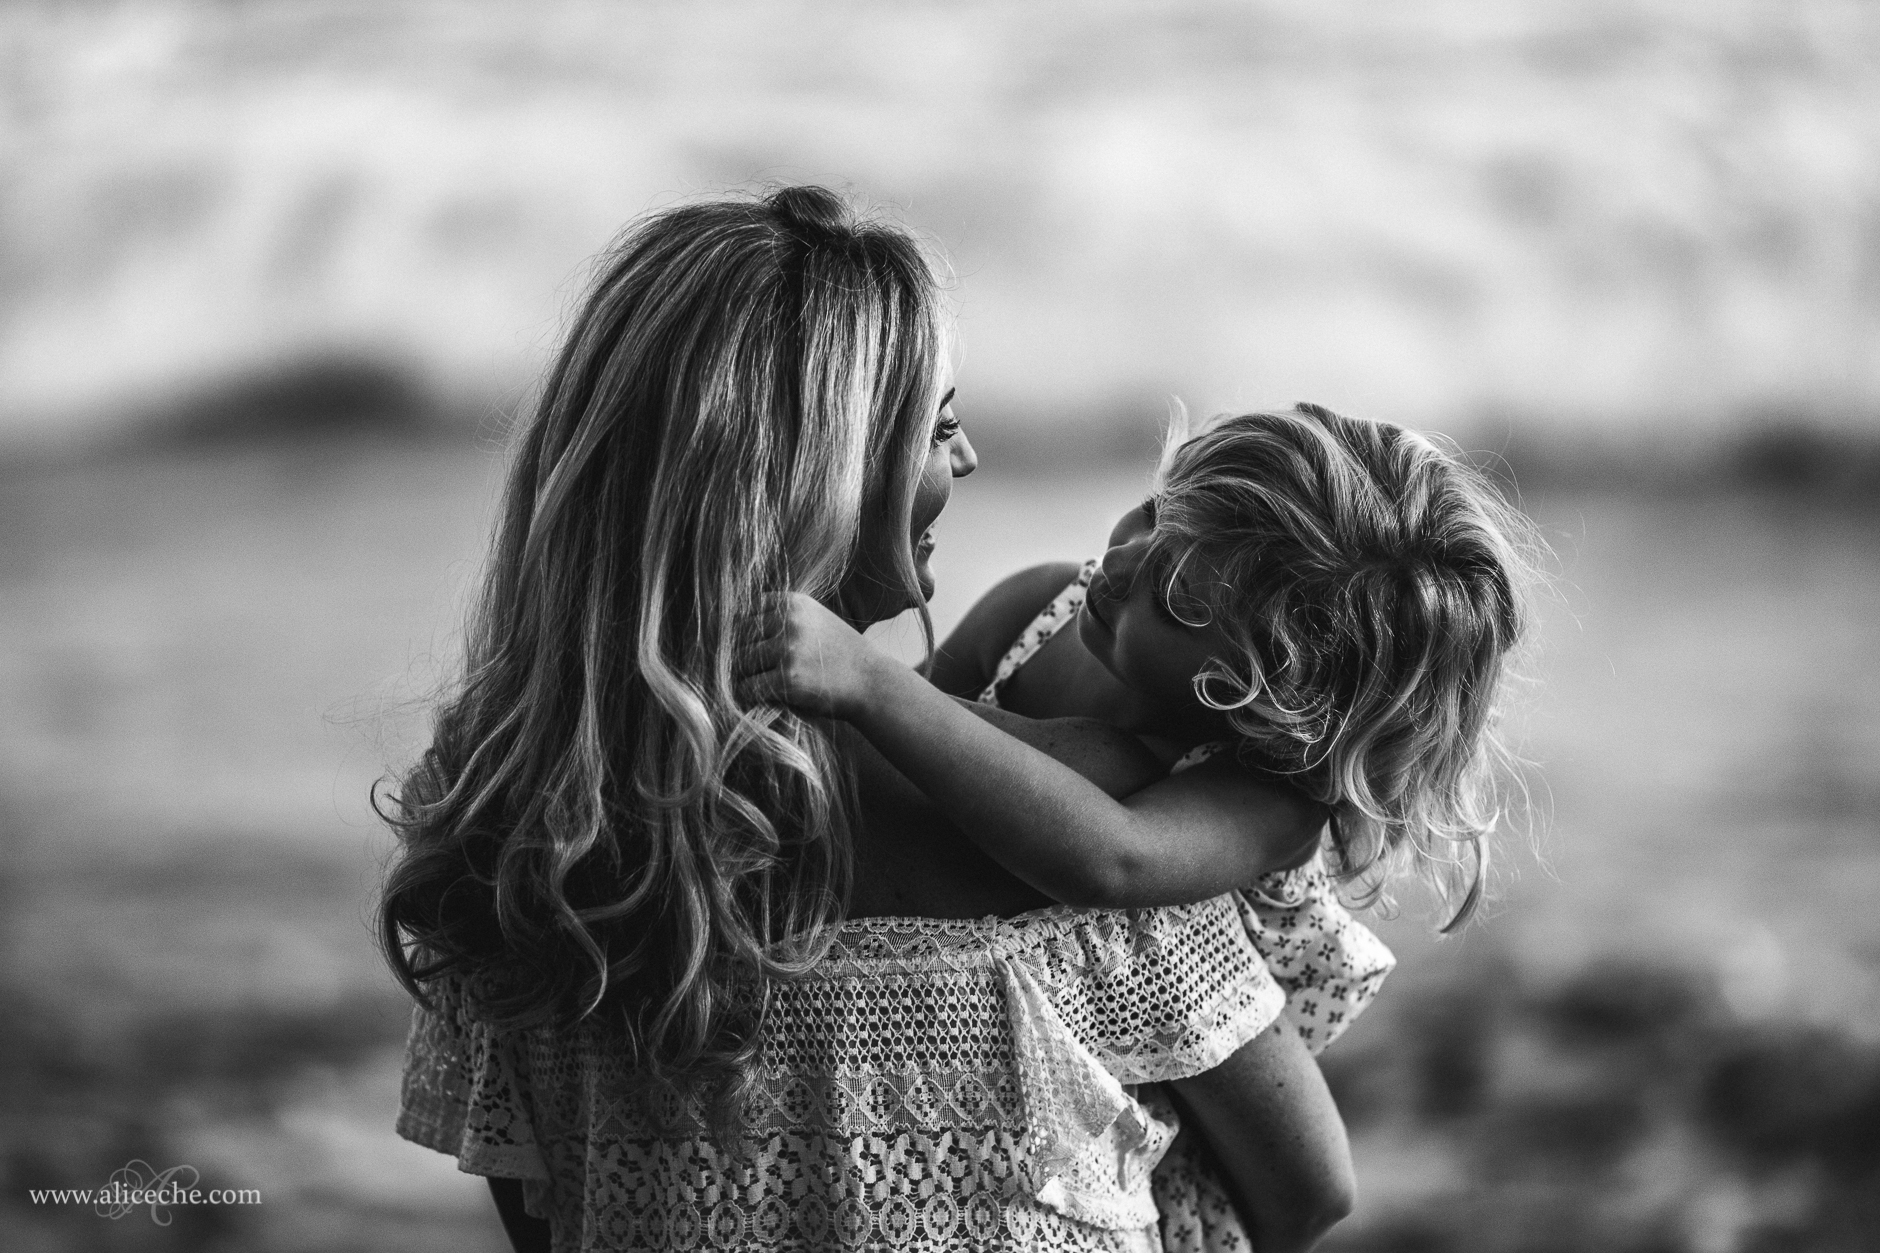 alice-che-photography-blair-thurston-retreat-malibu-family-session-girl-playing-with-moms-hair